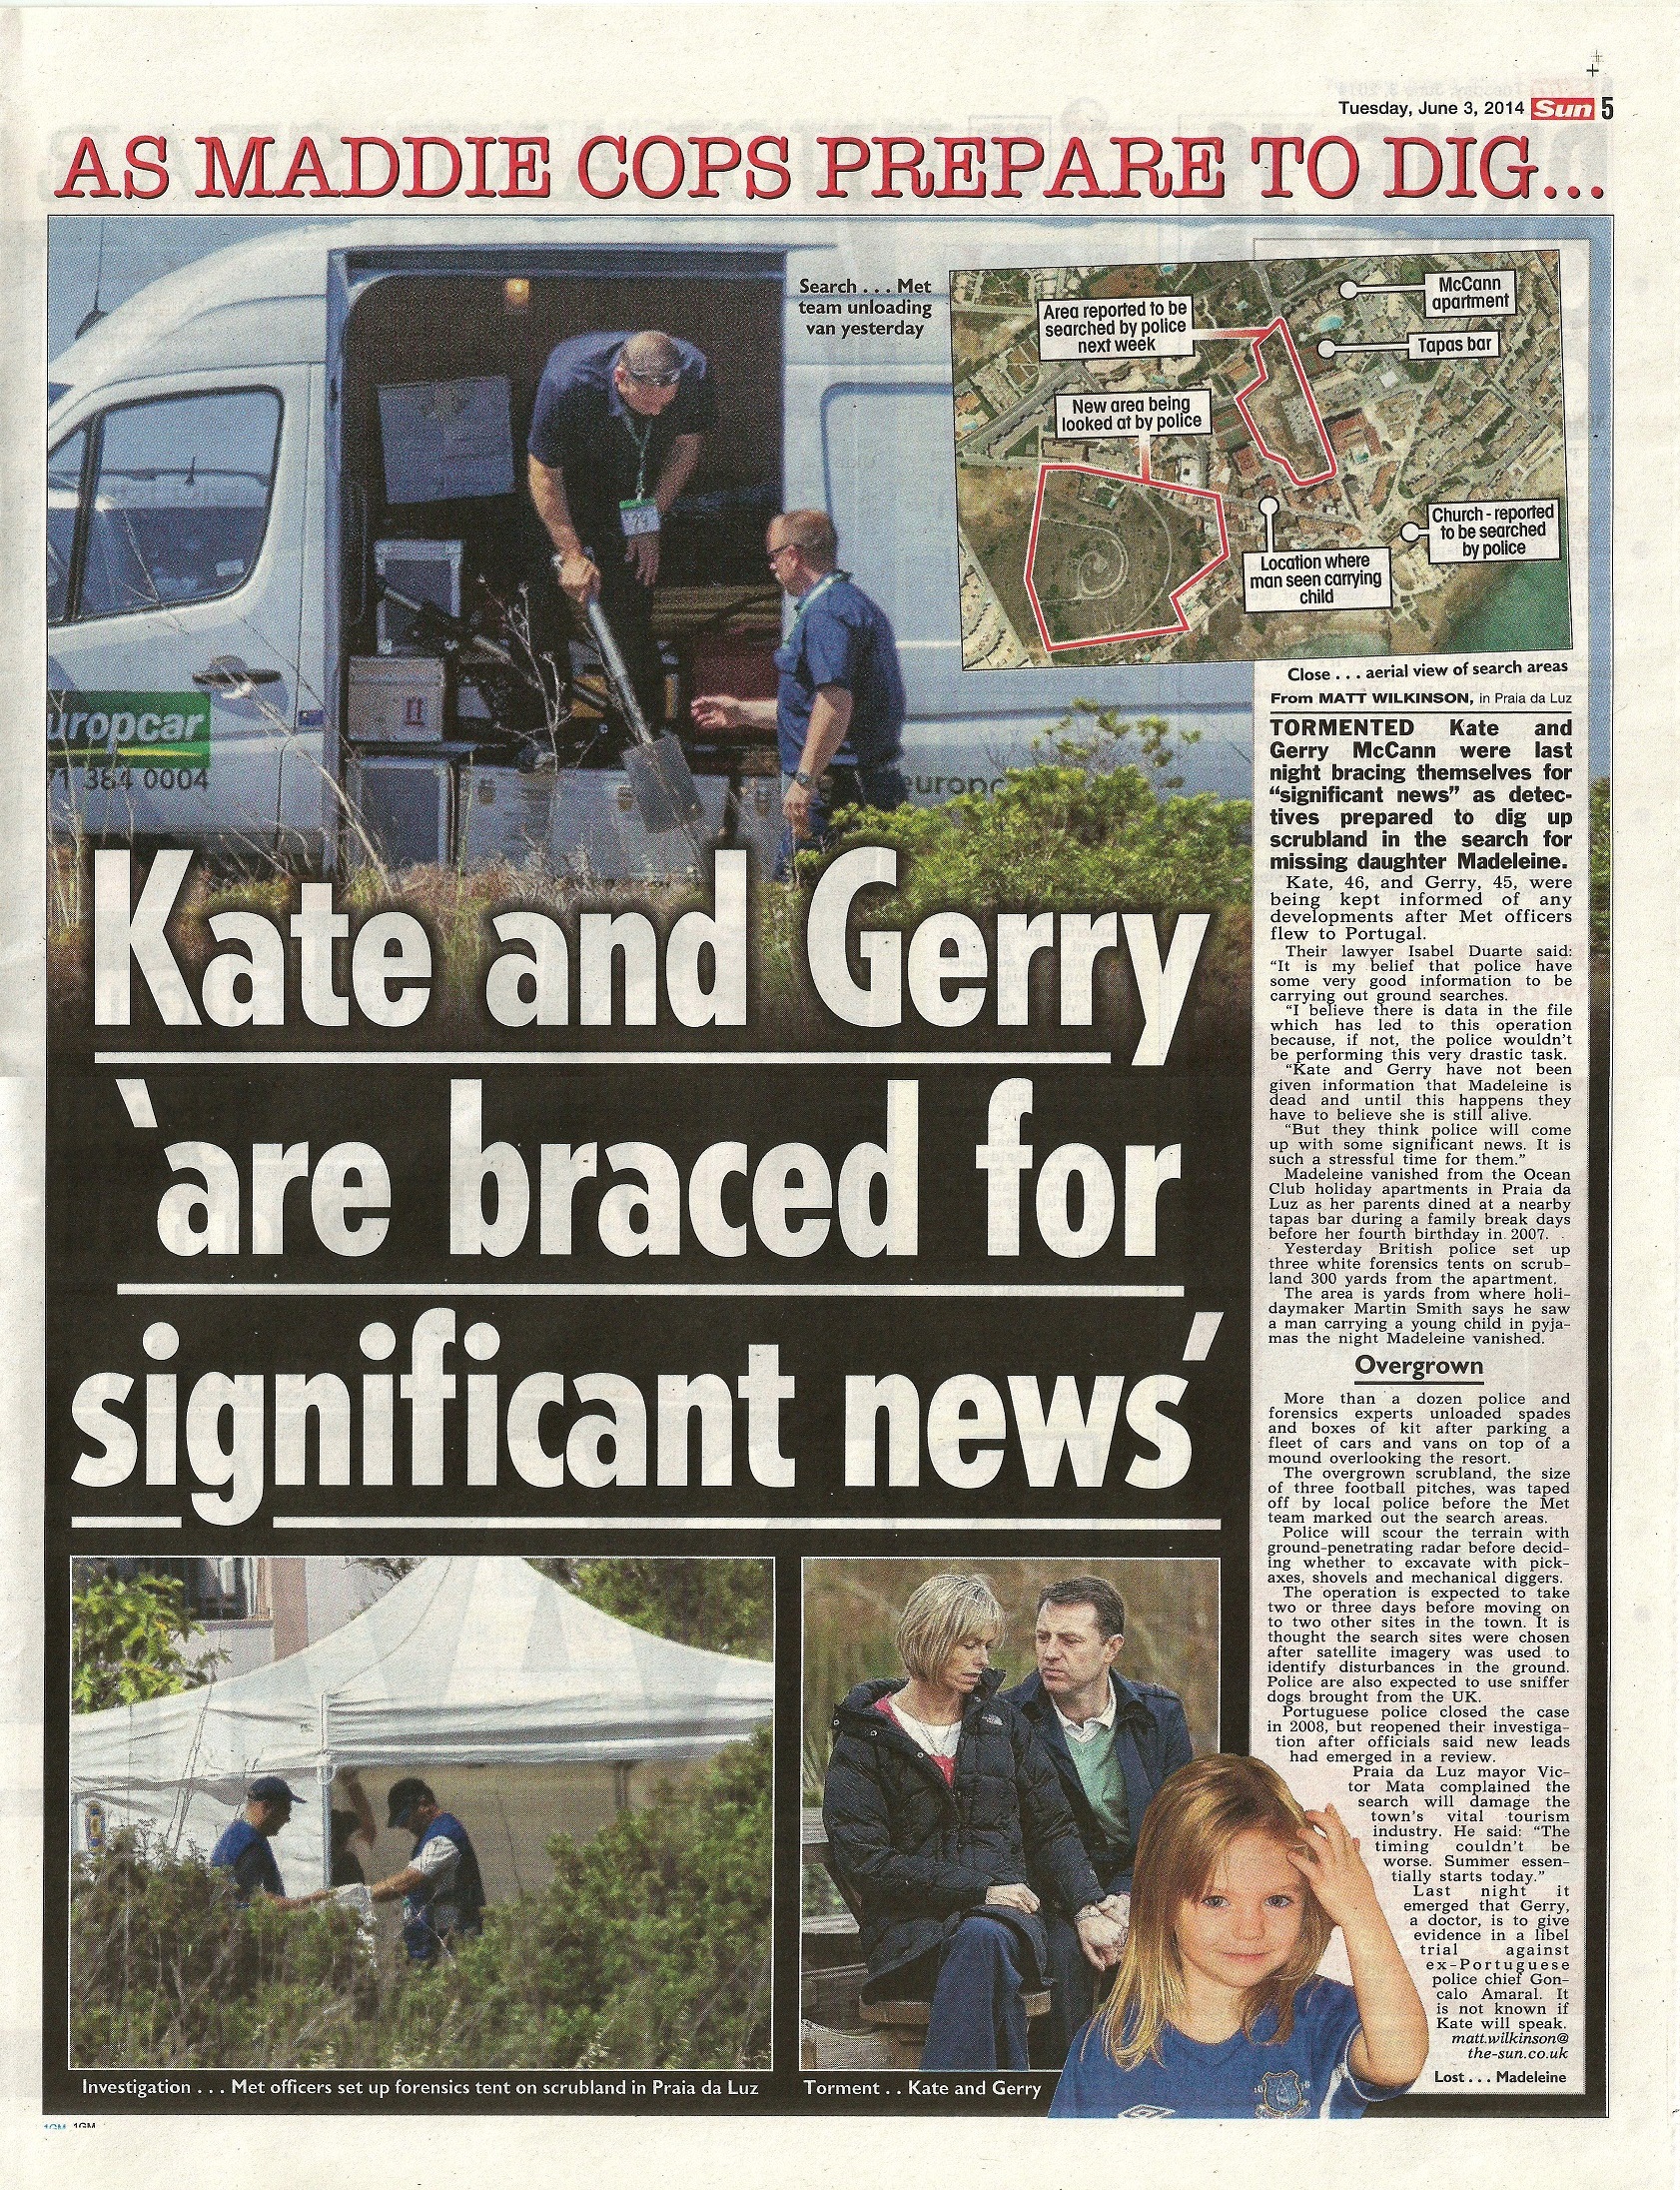 As Maddie cops prepare to dig... Kate and Gerry 'are braced for significant news' - The Sun, 03 June 2014 (paper edition, page 5)